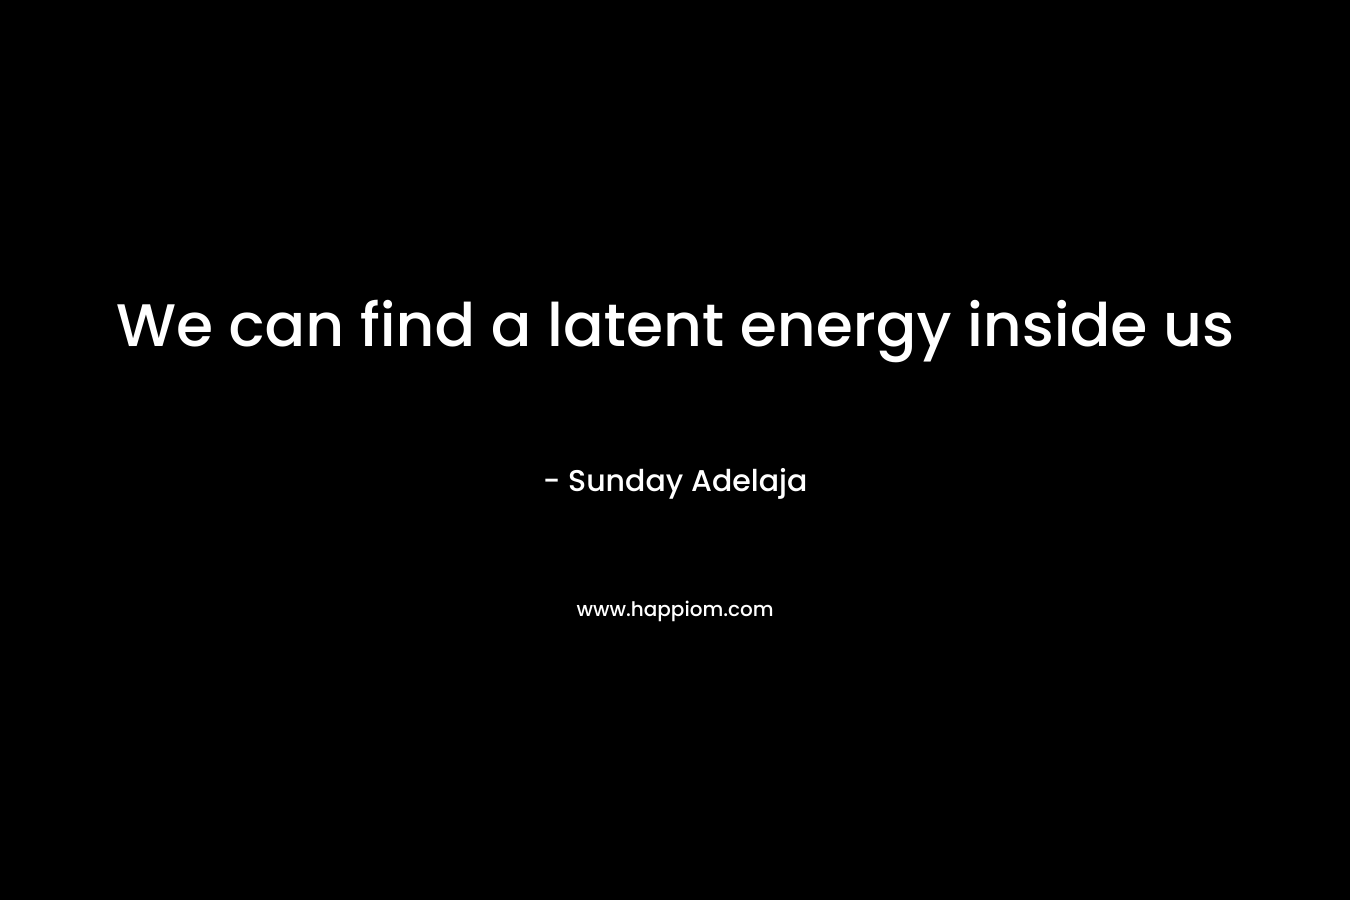 We can find a latent energy inside us